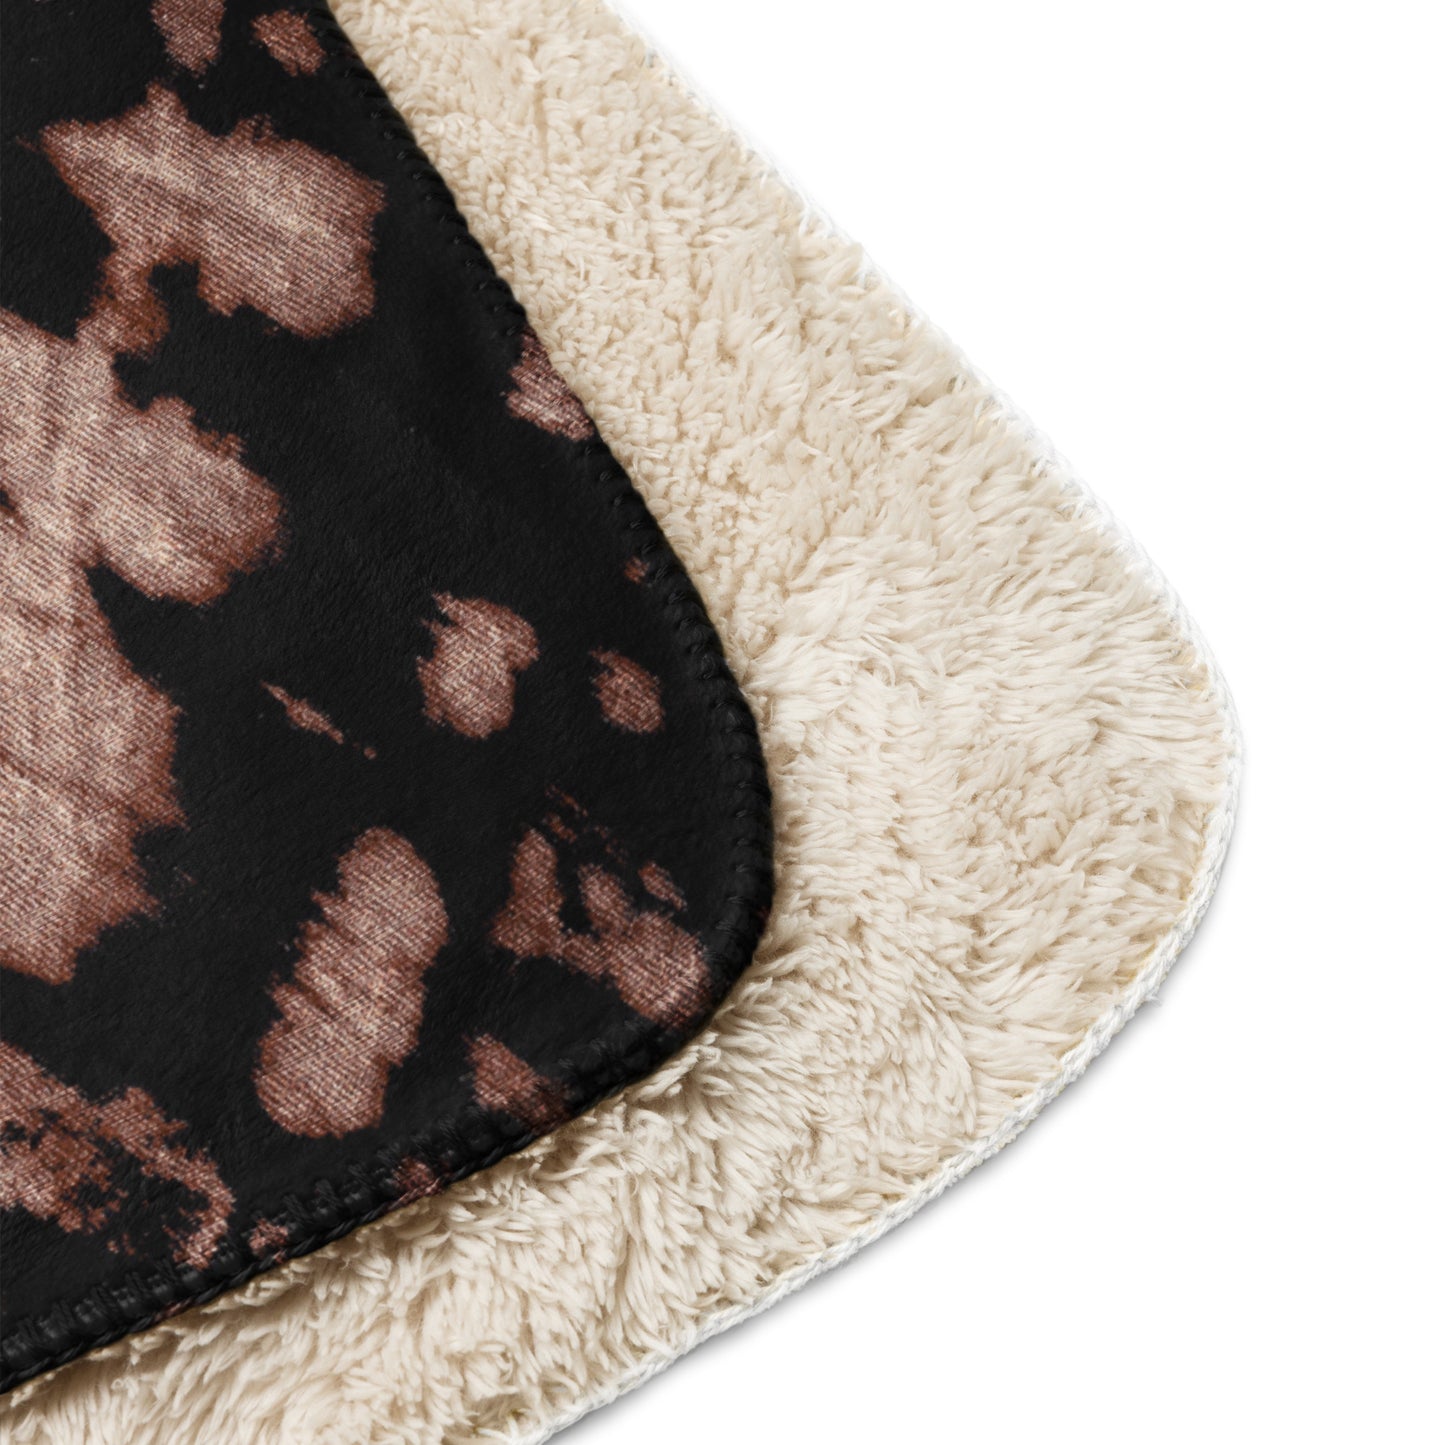 ABSTRACT BROWN SHERPA BLANKET